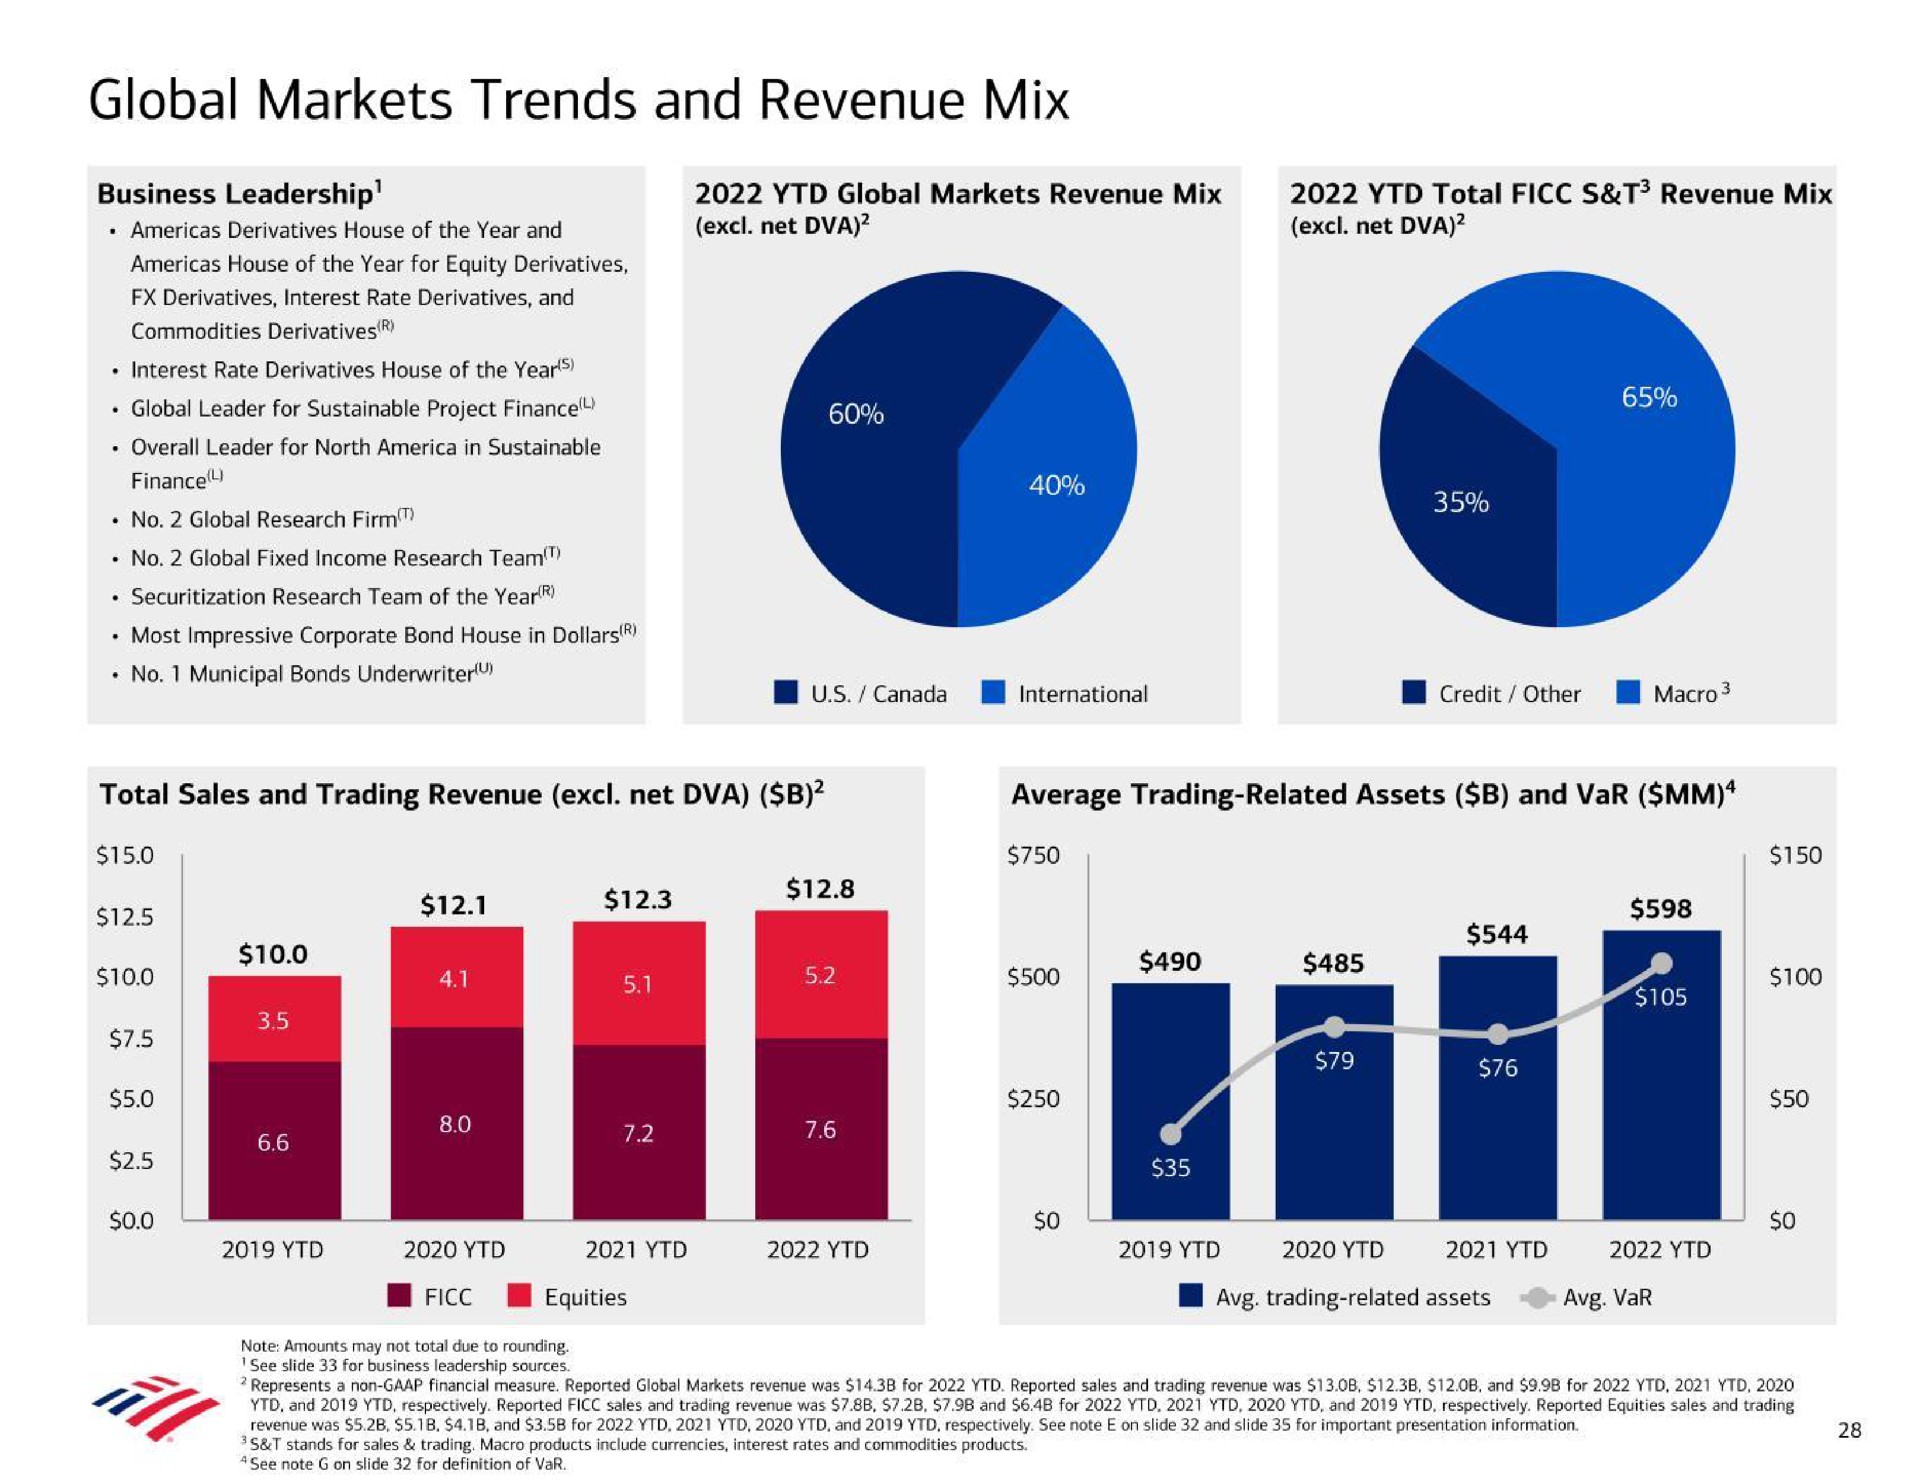 global markets trends and revenue mix business leadership equities | Bank of America